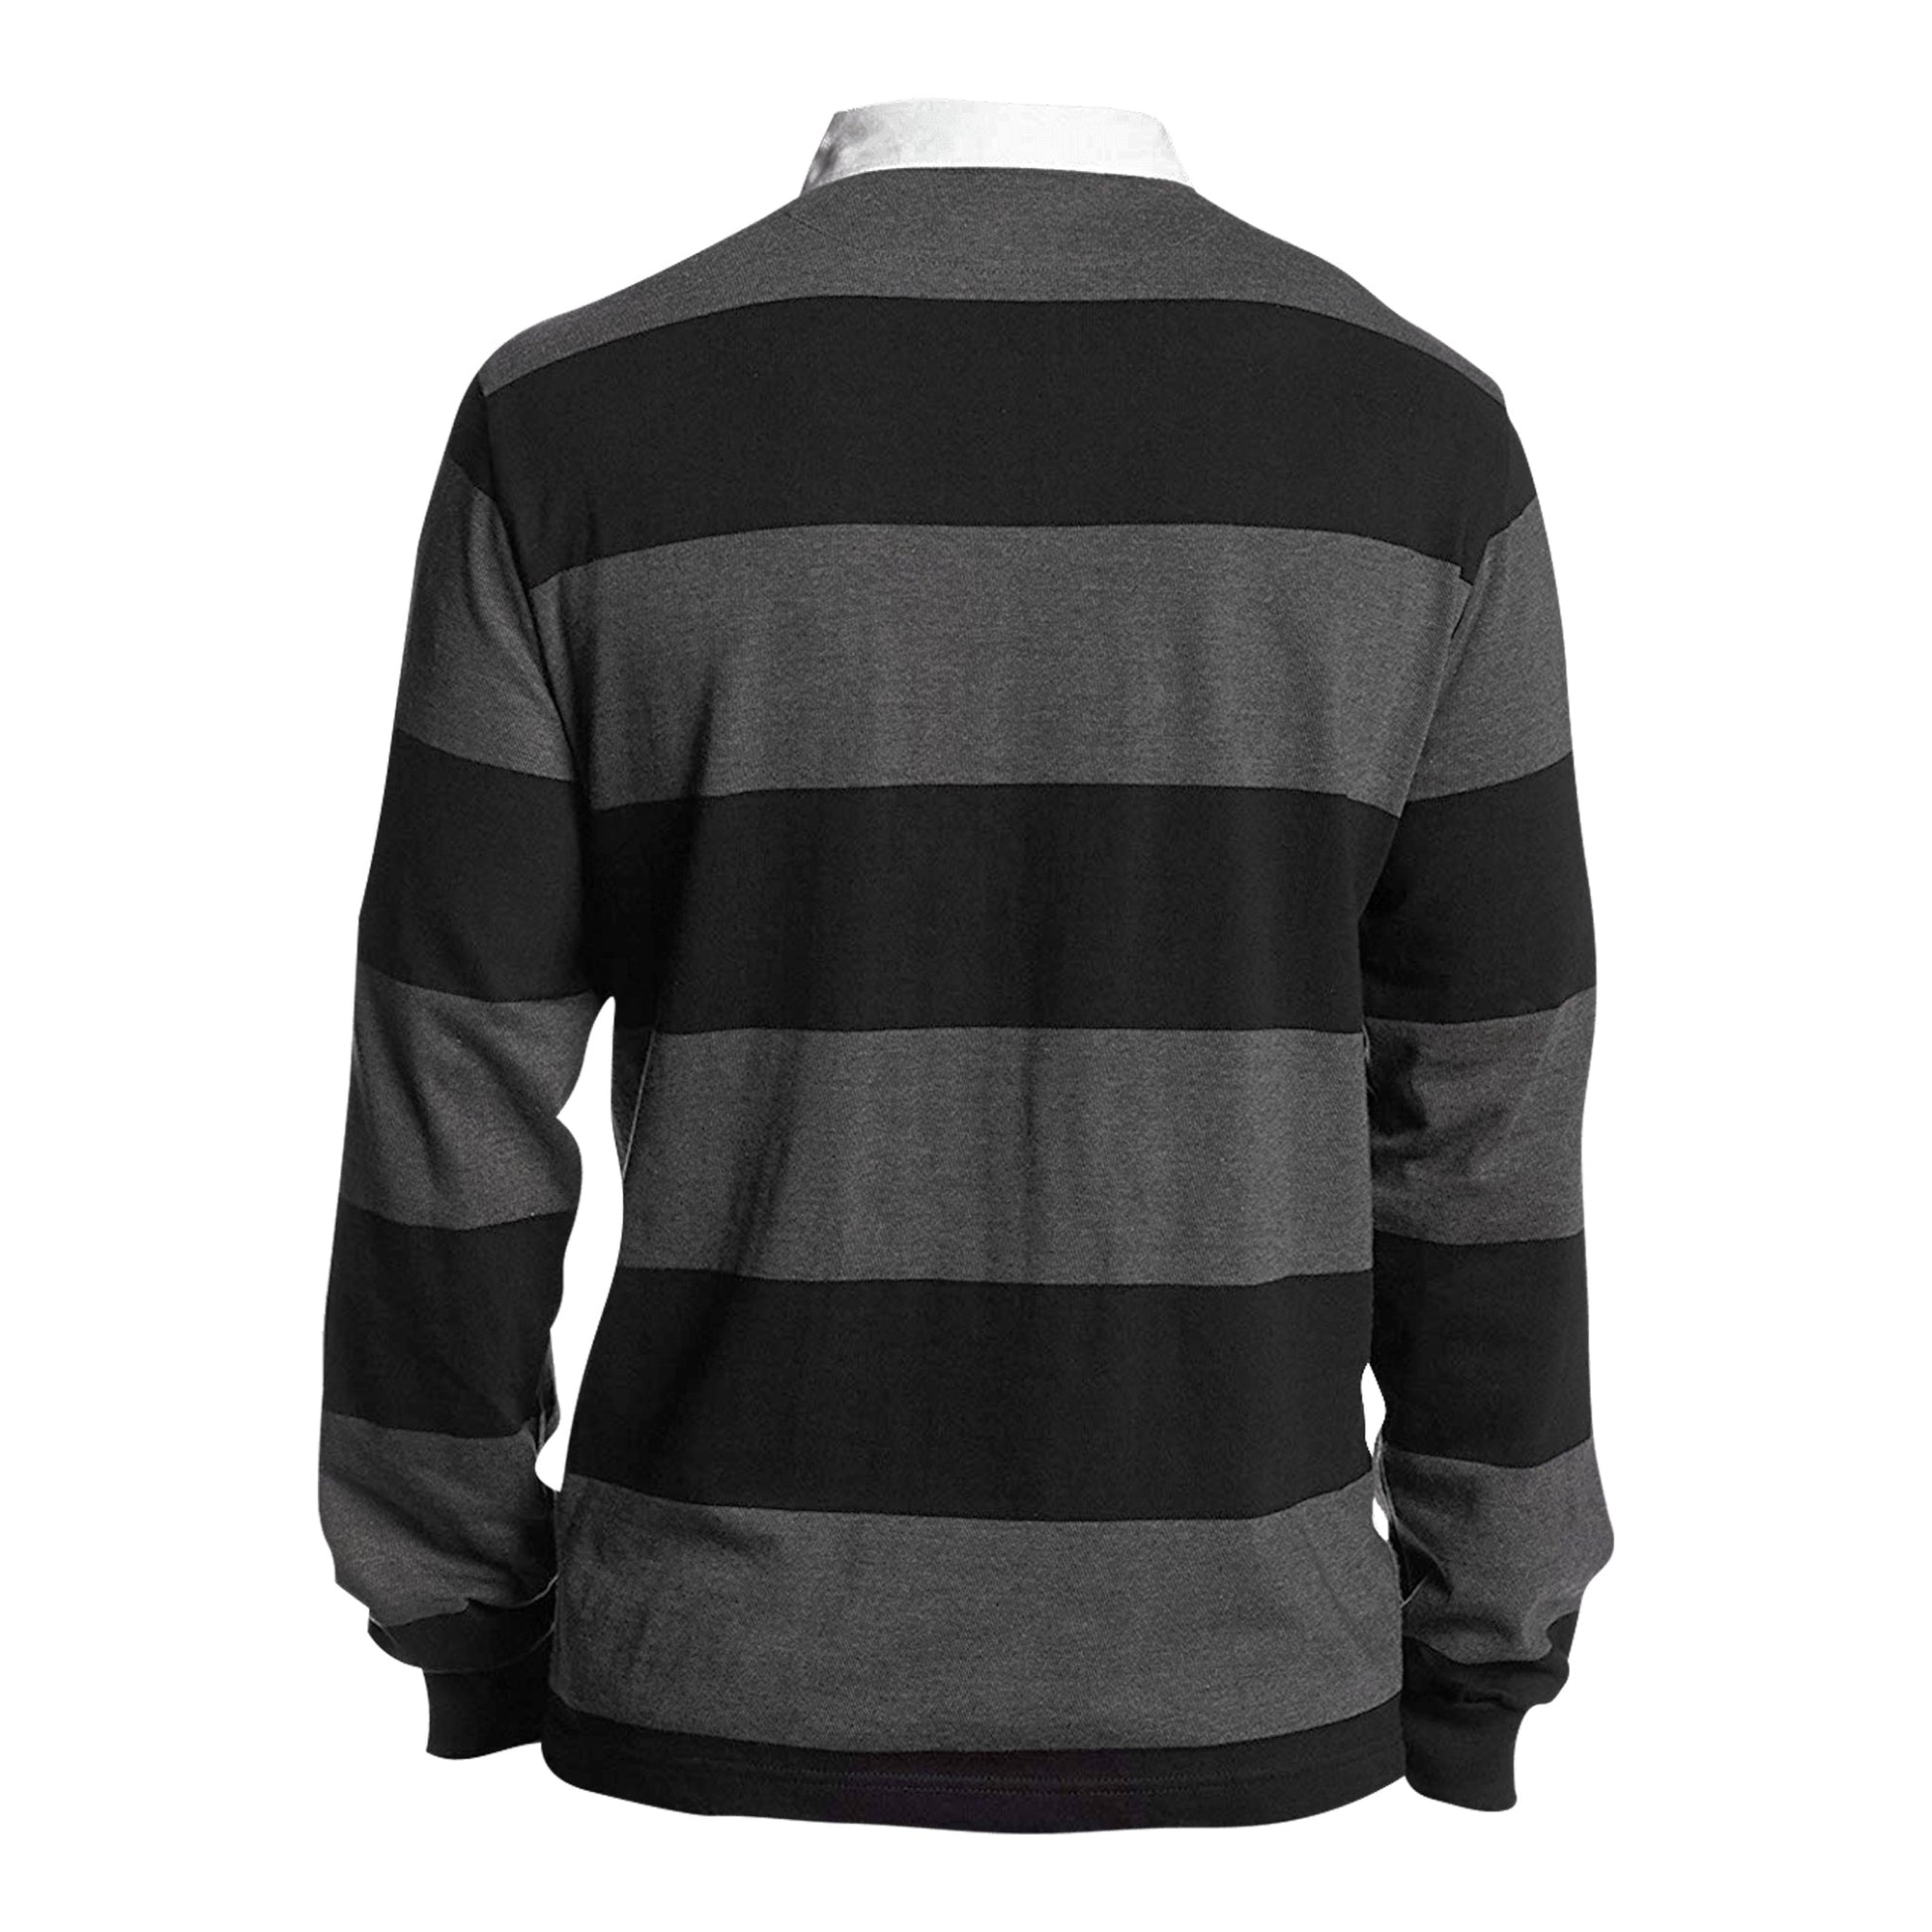 Rugby Imports NOVA  Cotton Social Jersey